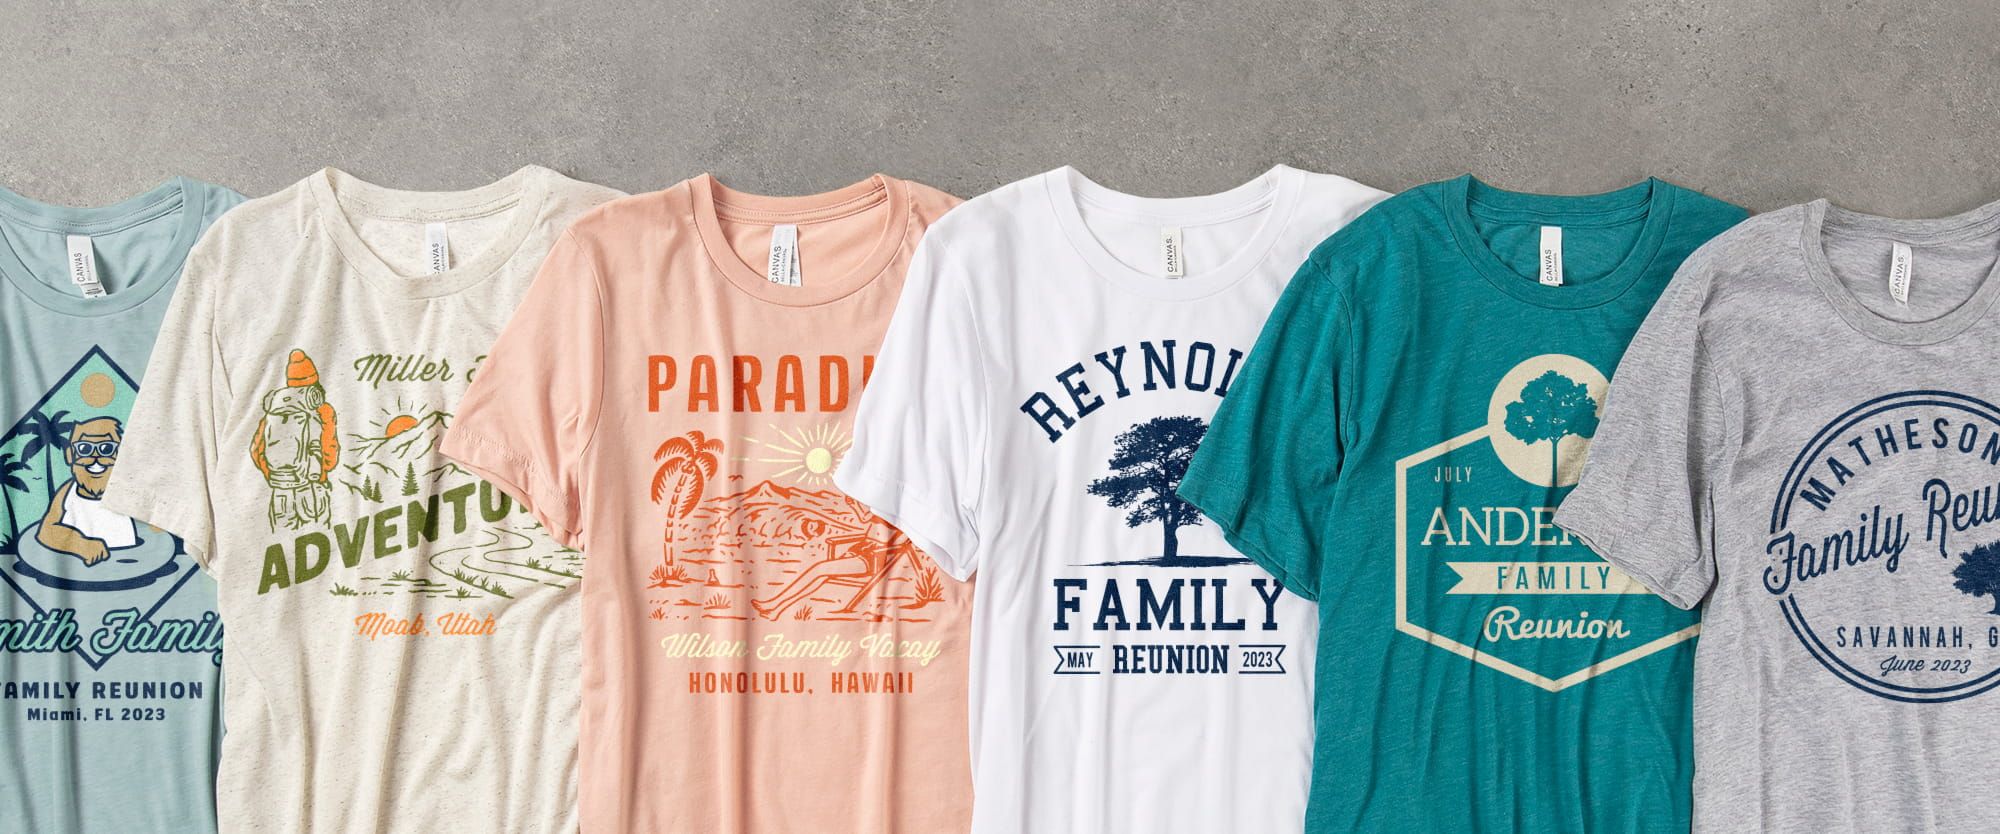 6 Ideas For Family Reunion T-Shirts